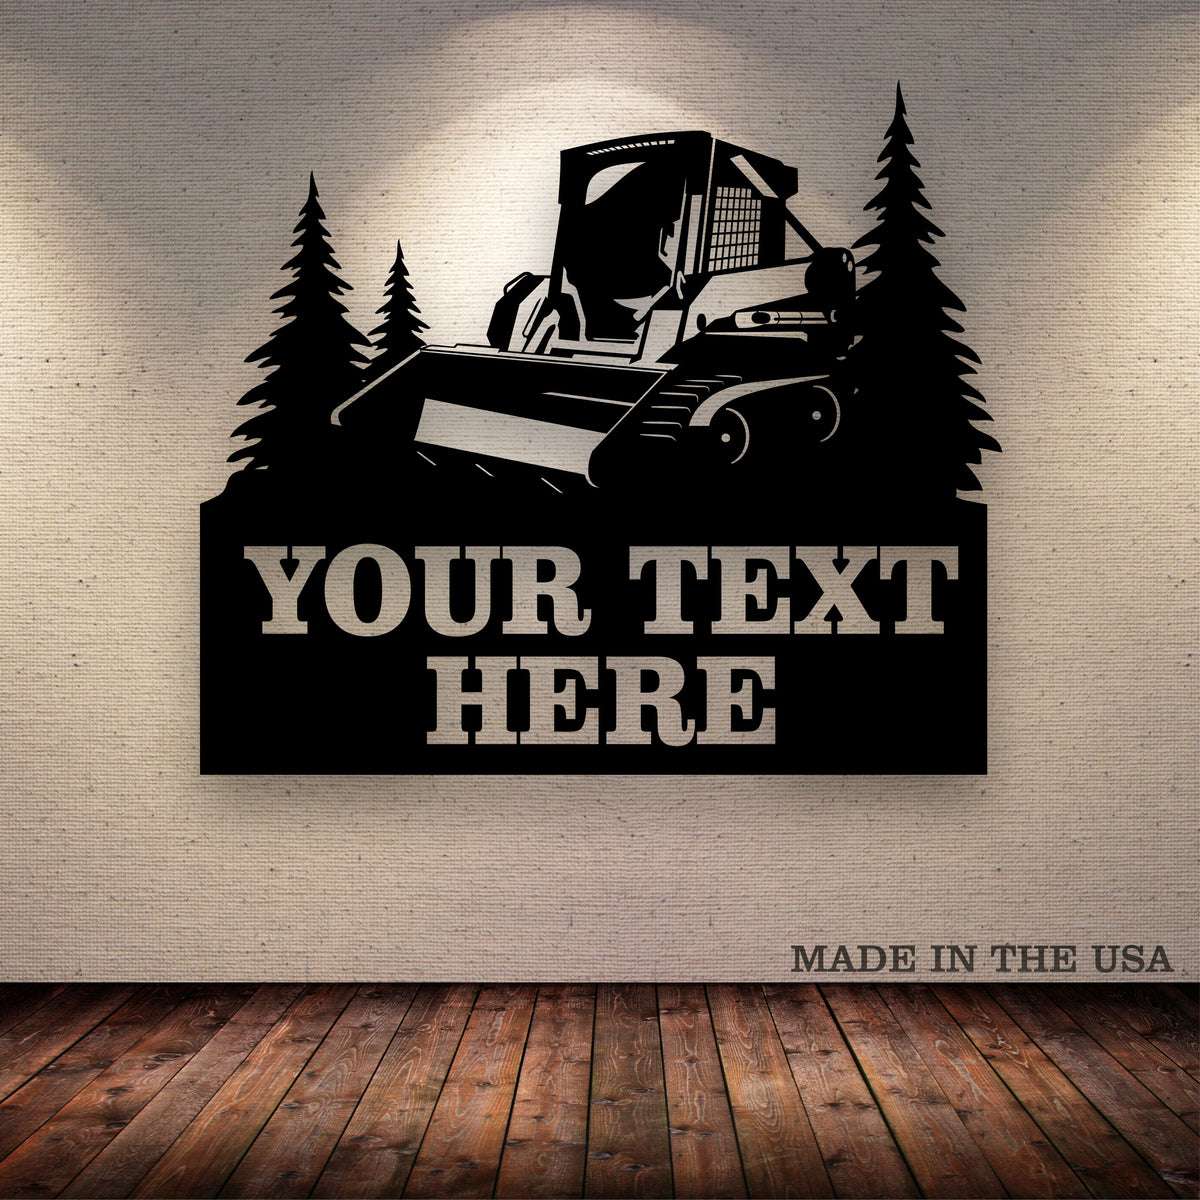 Skid Loader Bobcat Tracks Trees Your Text Here Metal Wall Art Free Shipping